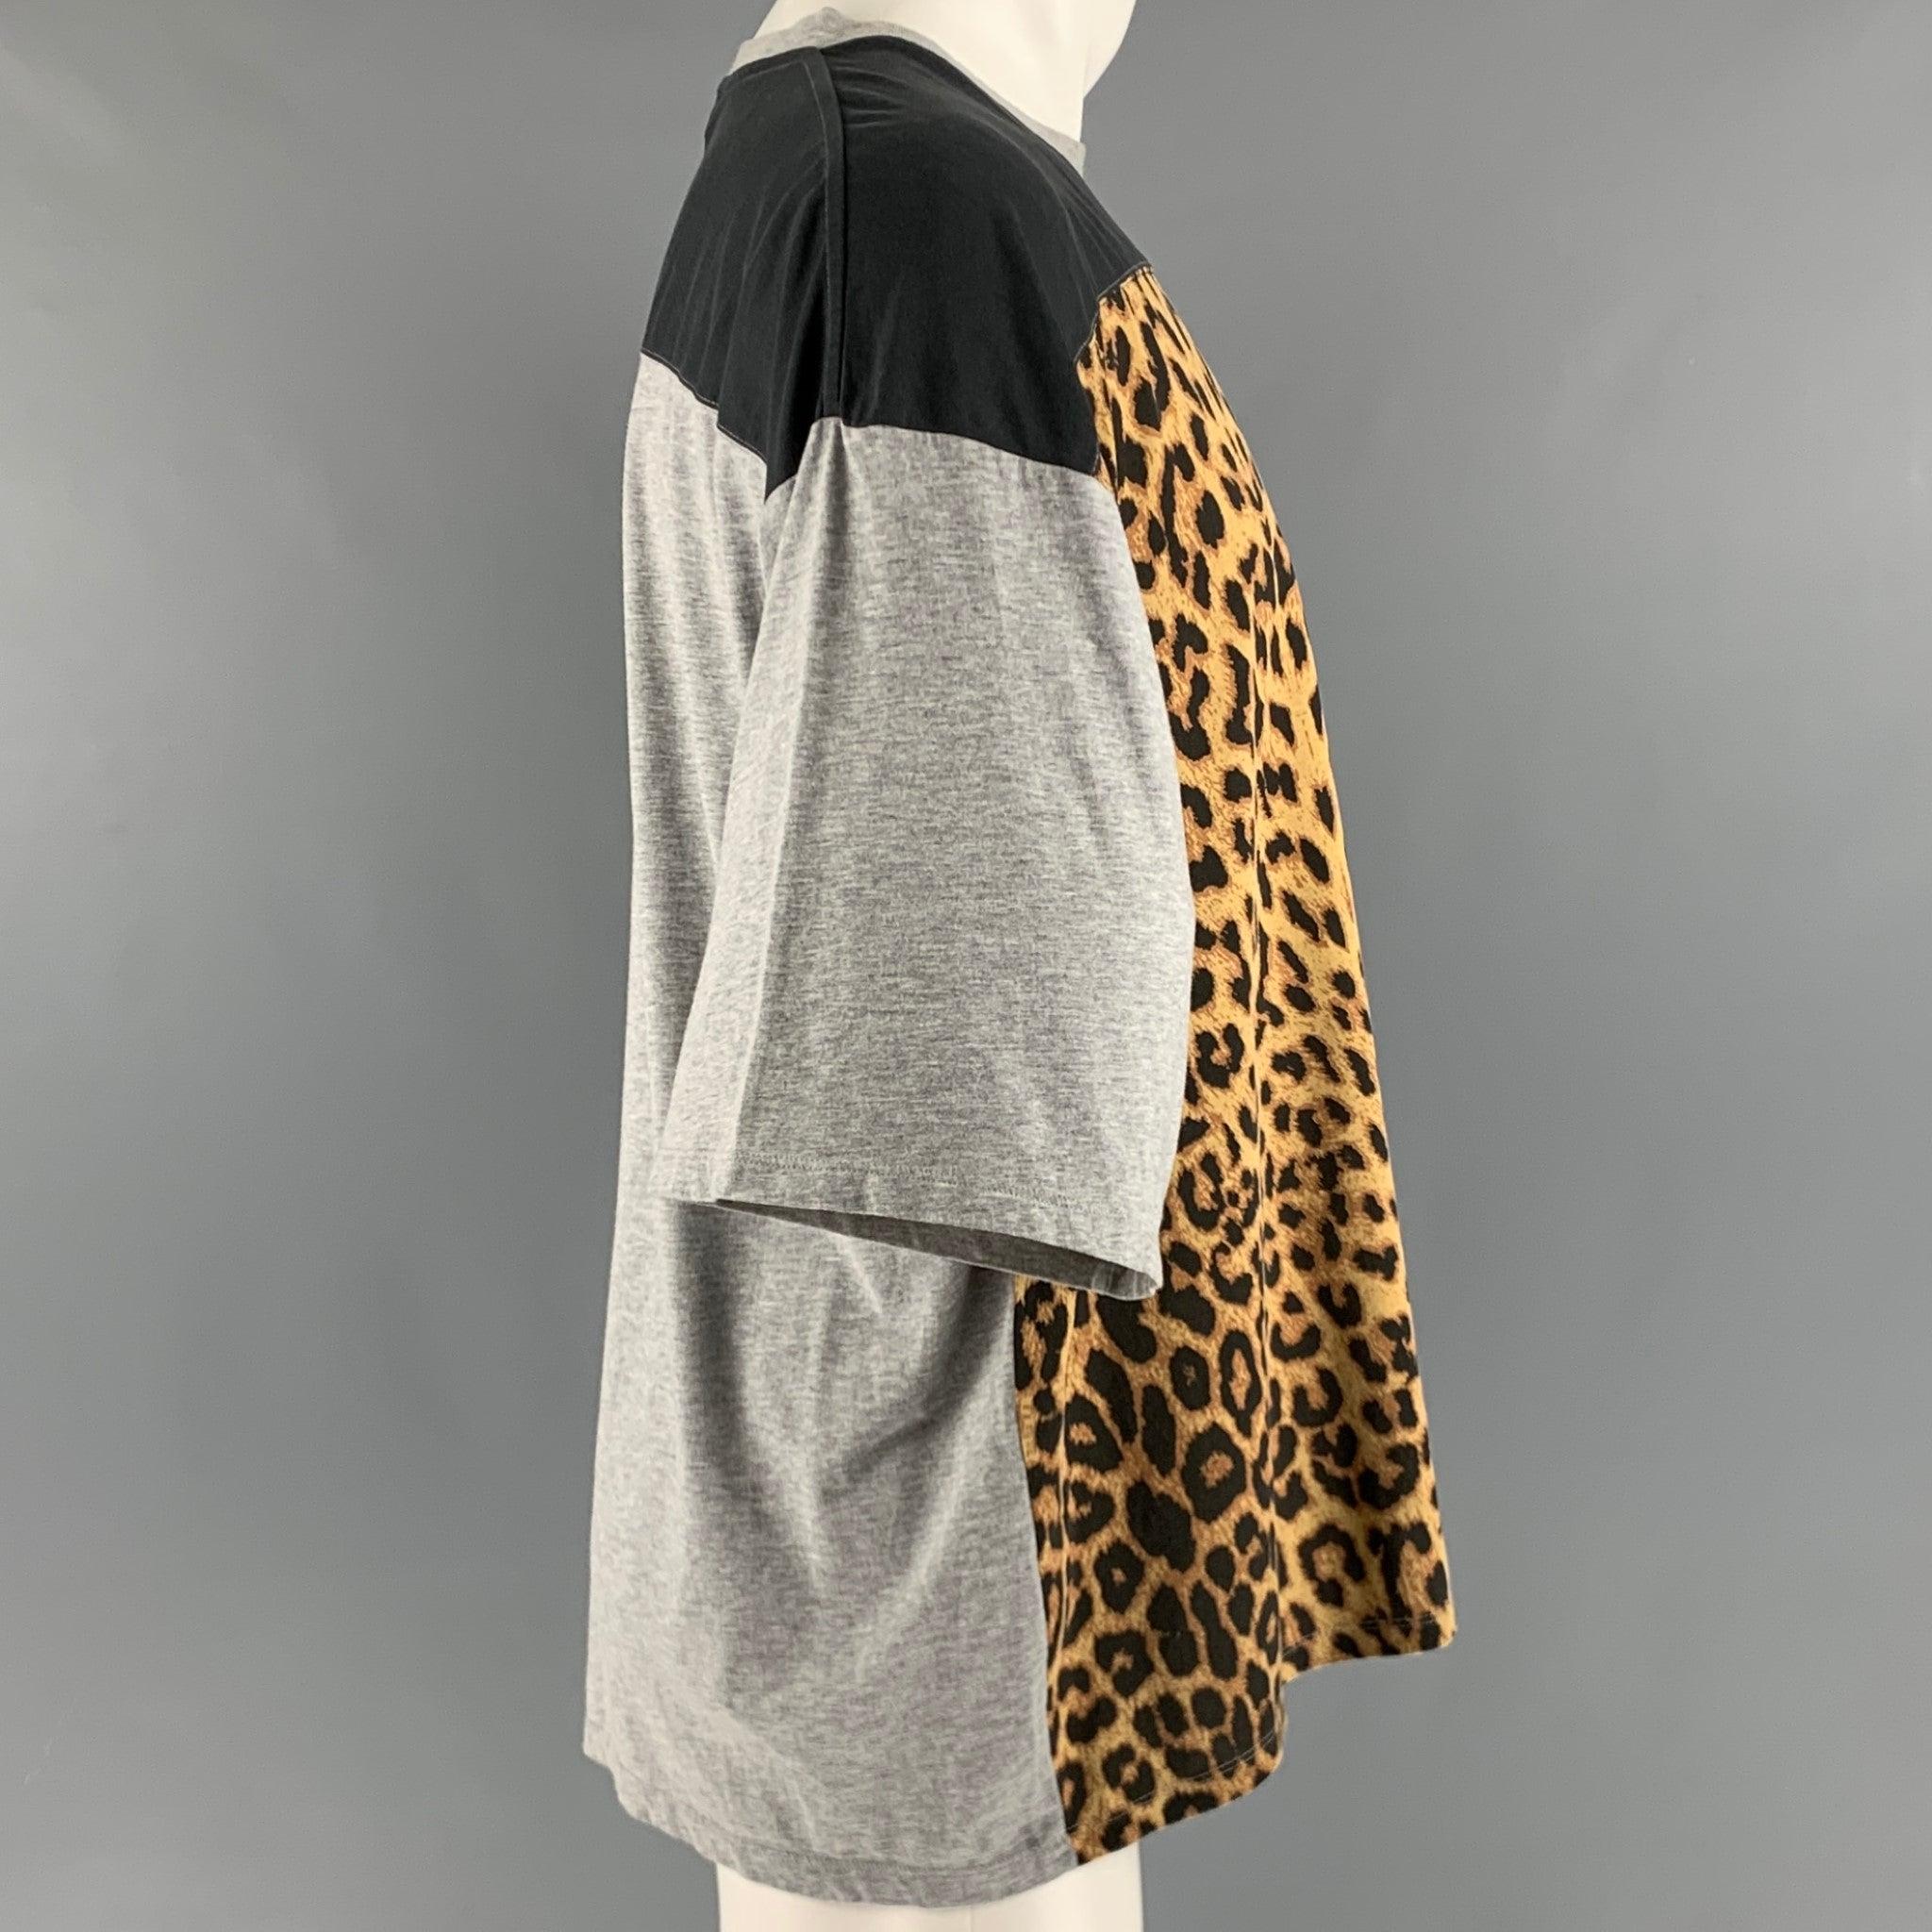 SAINT LAUREN t-shirt
in a black, grey, and brown cotton fabric featuring animal print front panel, and crew neck. Made in Italy.Very Good Pre-Owned Condition. Minor mark and signs of wear, as is. 

Marked:   M 

Measurements: 
 
Shoulder: 25 inches